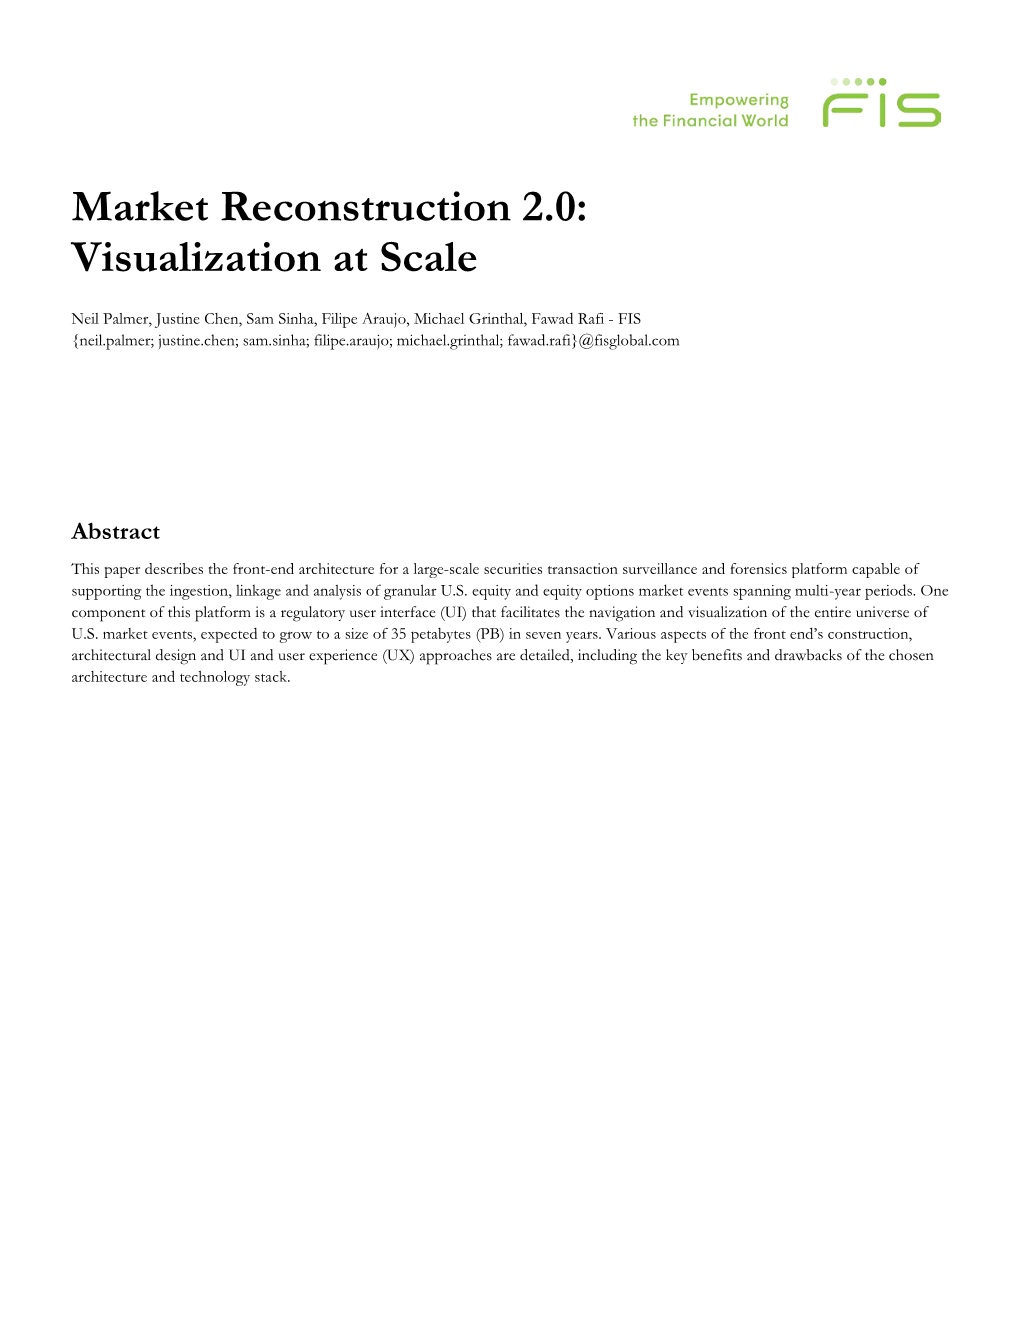 Market Reconstruction 2.0: Visualization at Scale